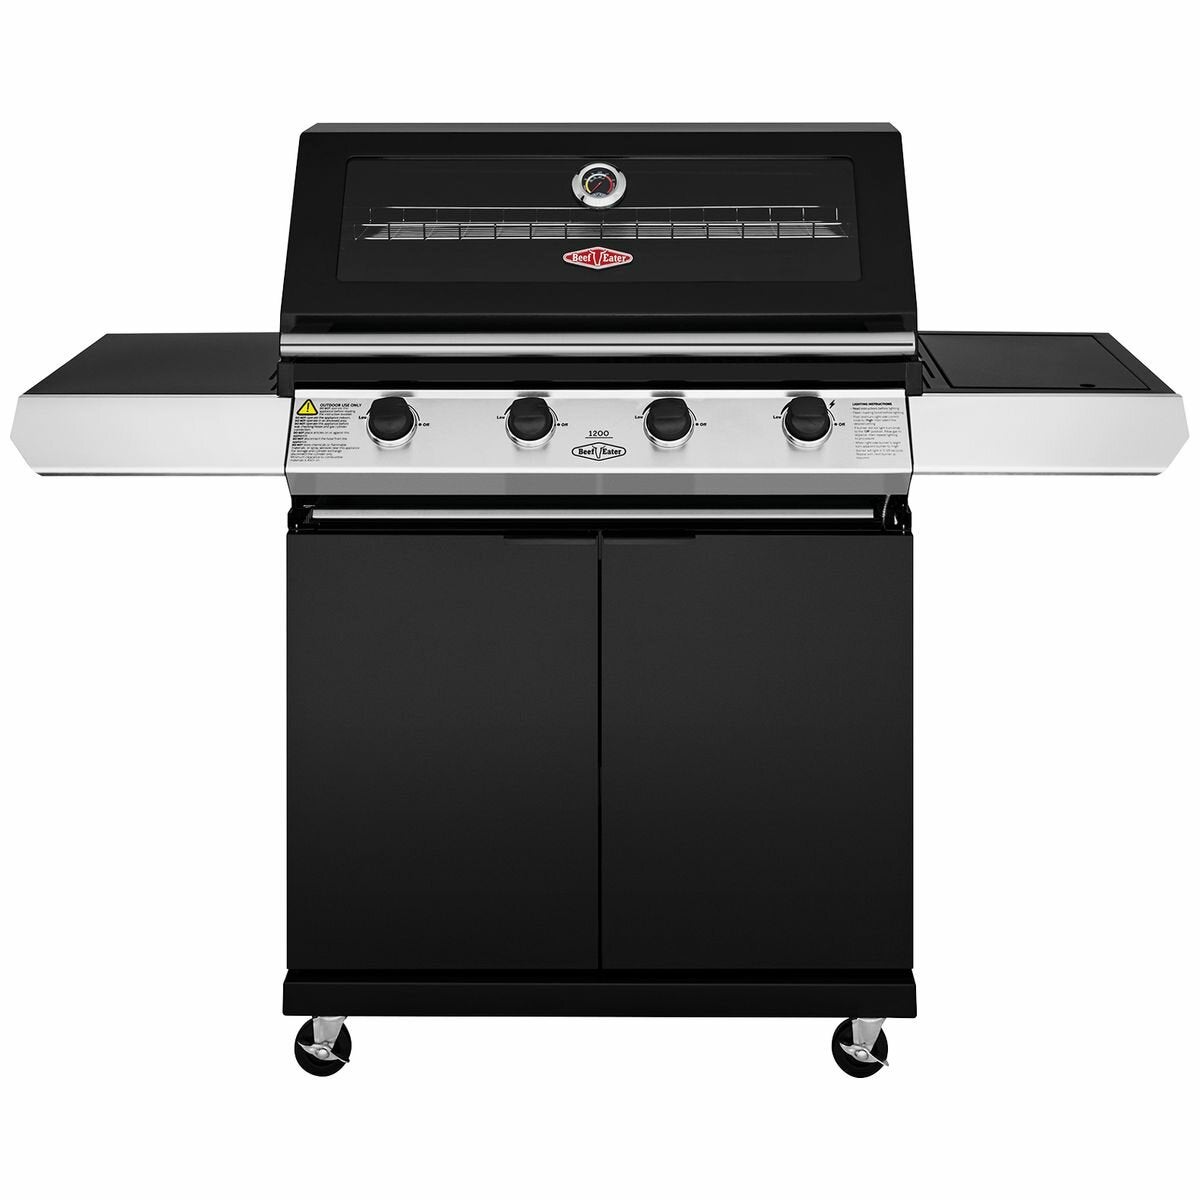 Image of Beefeater 1200 Series 4 Burner LPG BBQ with Trolley & Side Burner BMG1241BB